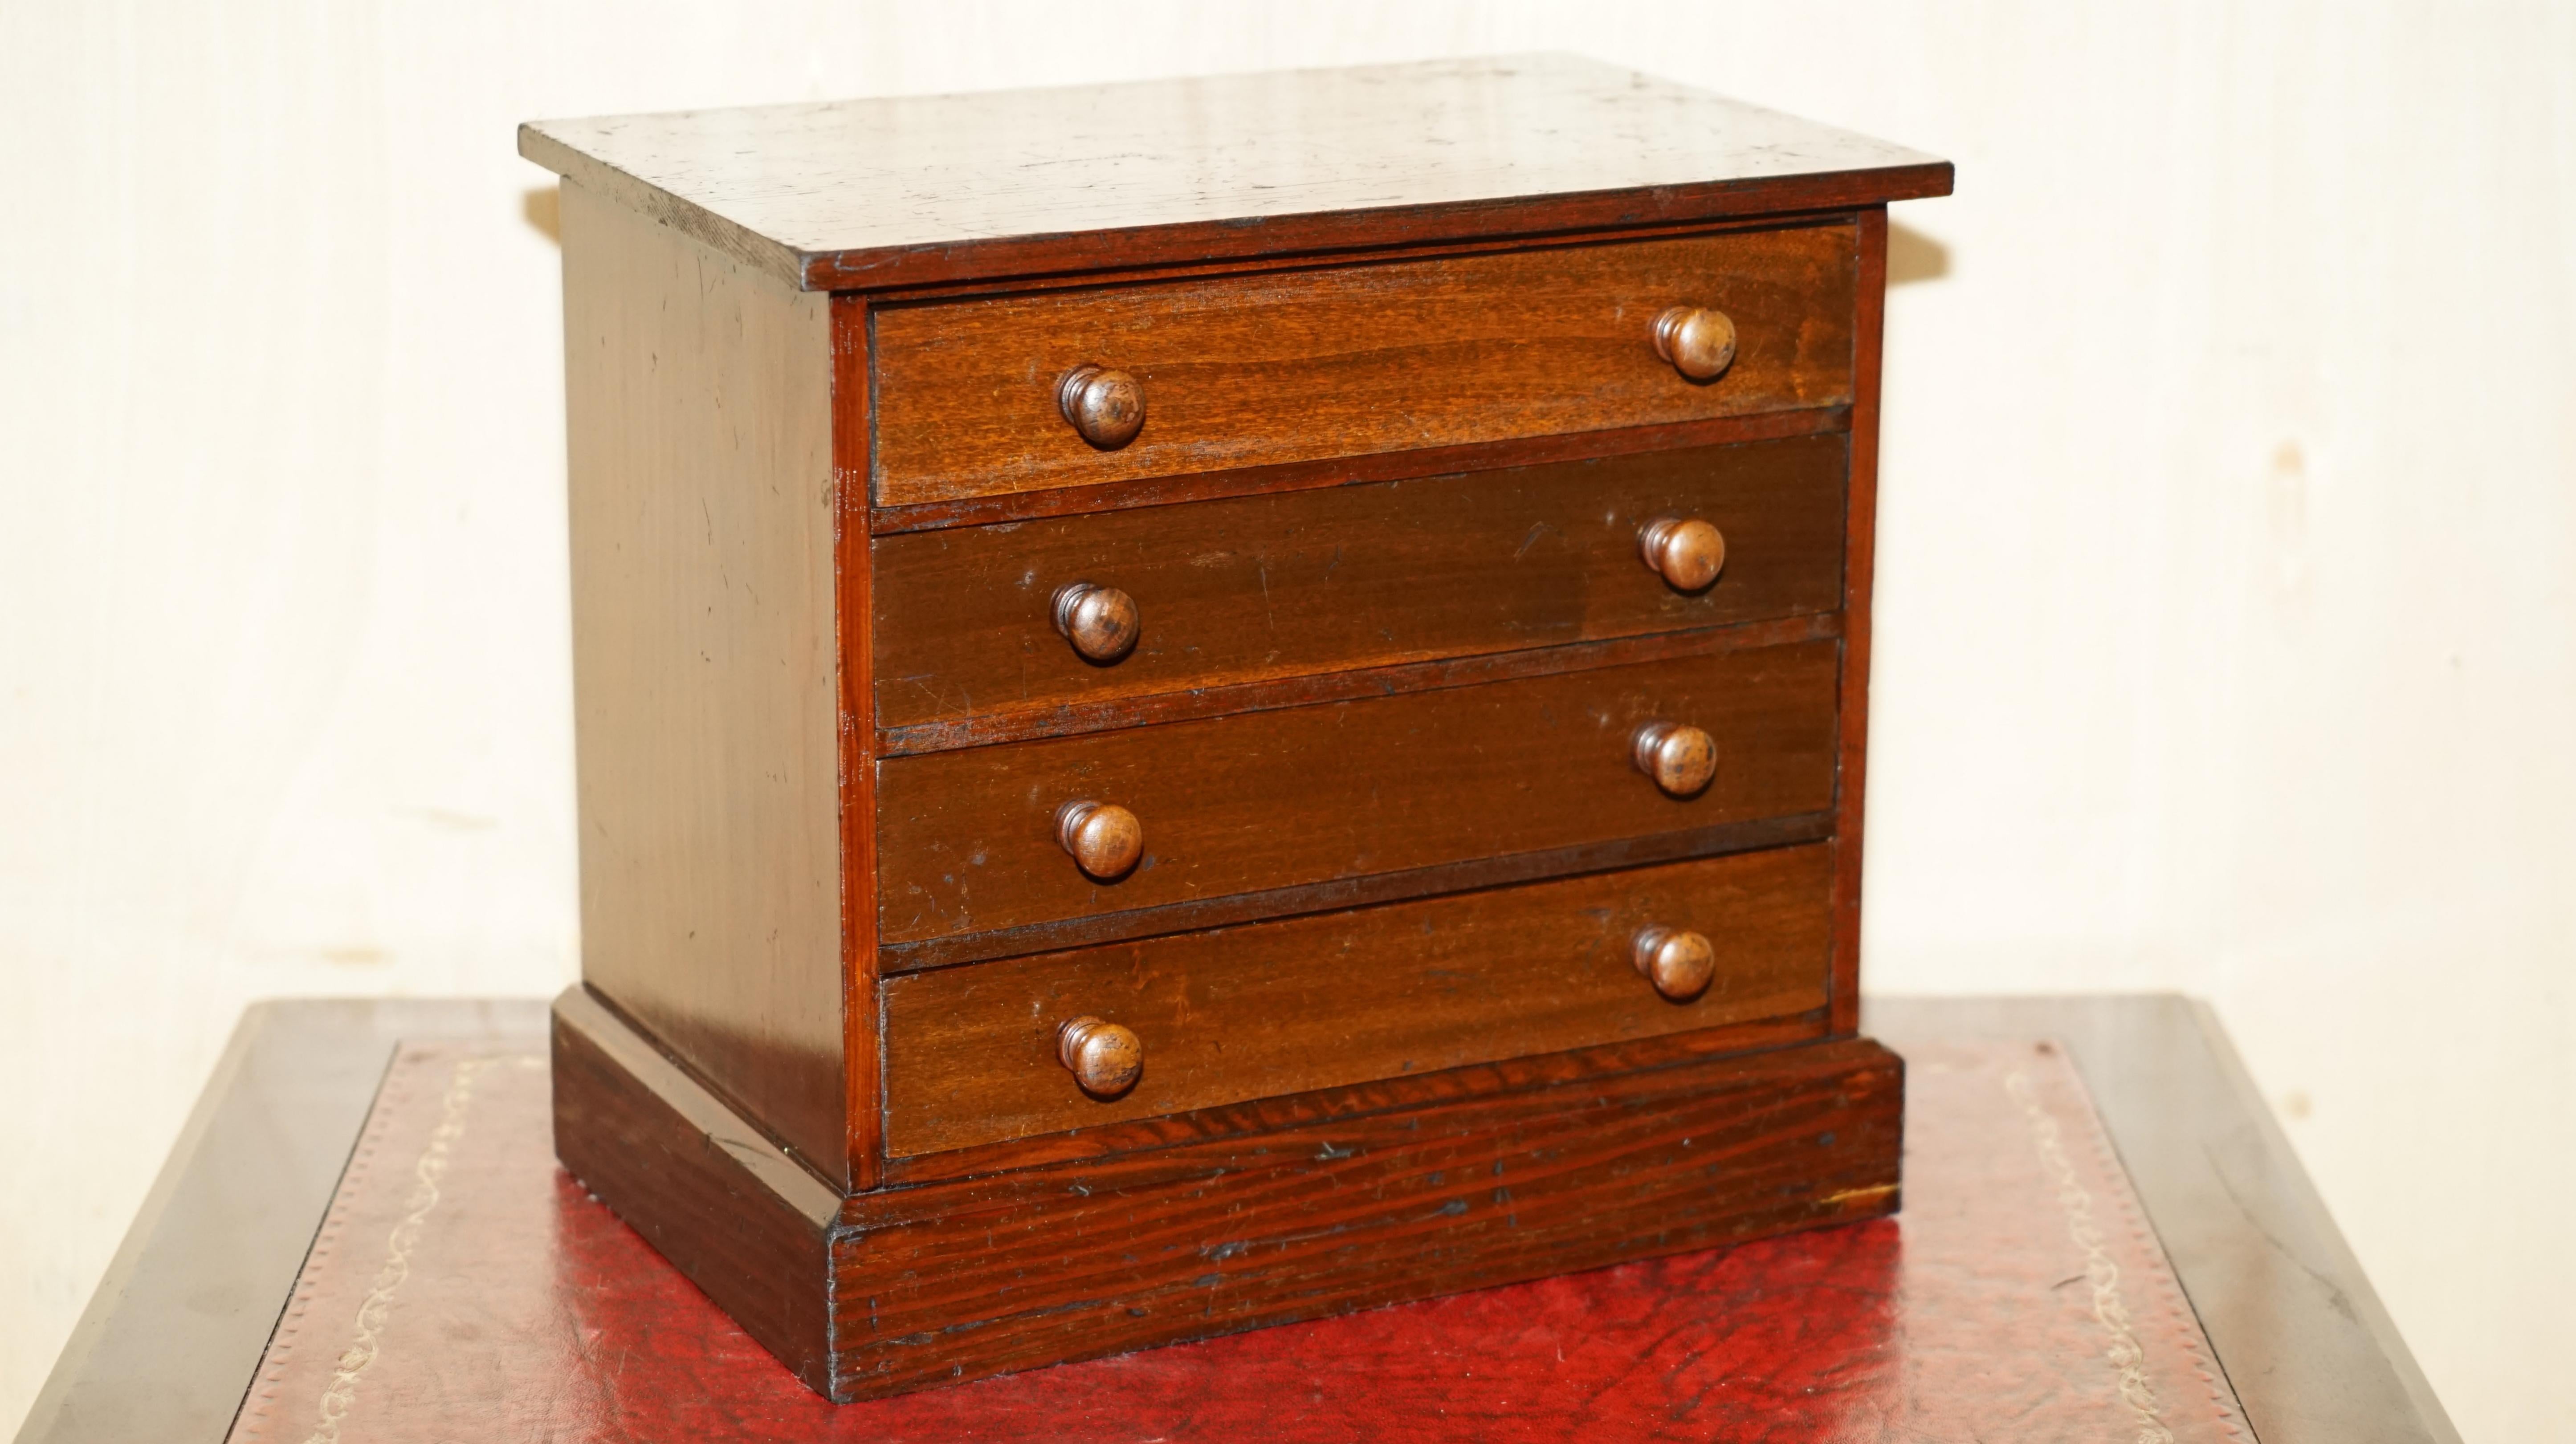 Royal House Antiques

Royal House Antiques is delighted to offer for sale this stunning little collectors cabinet in the form of a Georgian chest of drawers which houses four shelves of antique Taxidermy Butterfly's 

Please note the delivery fee